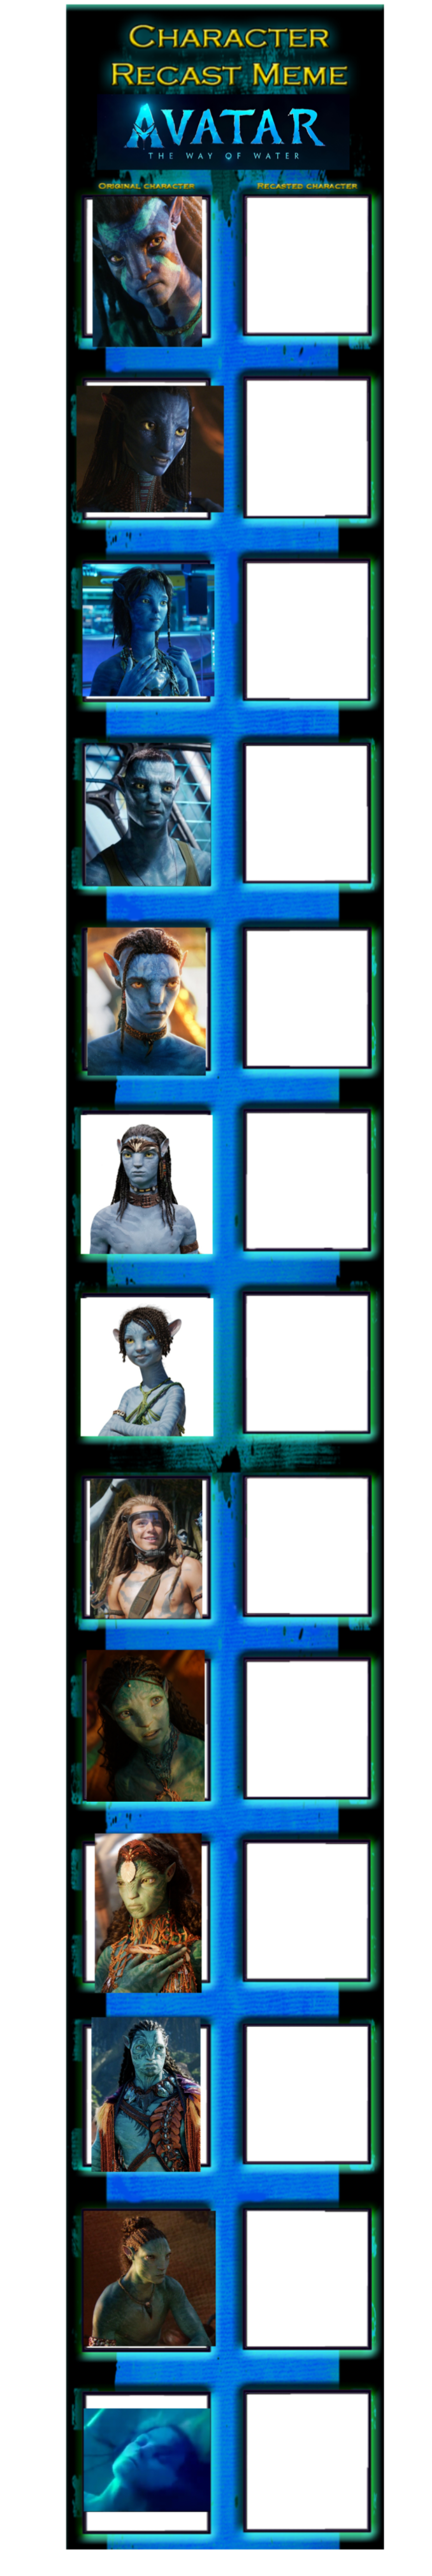 Avatar: The Way of Water - Recast Meme by Andrew-20 on DeviantArt